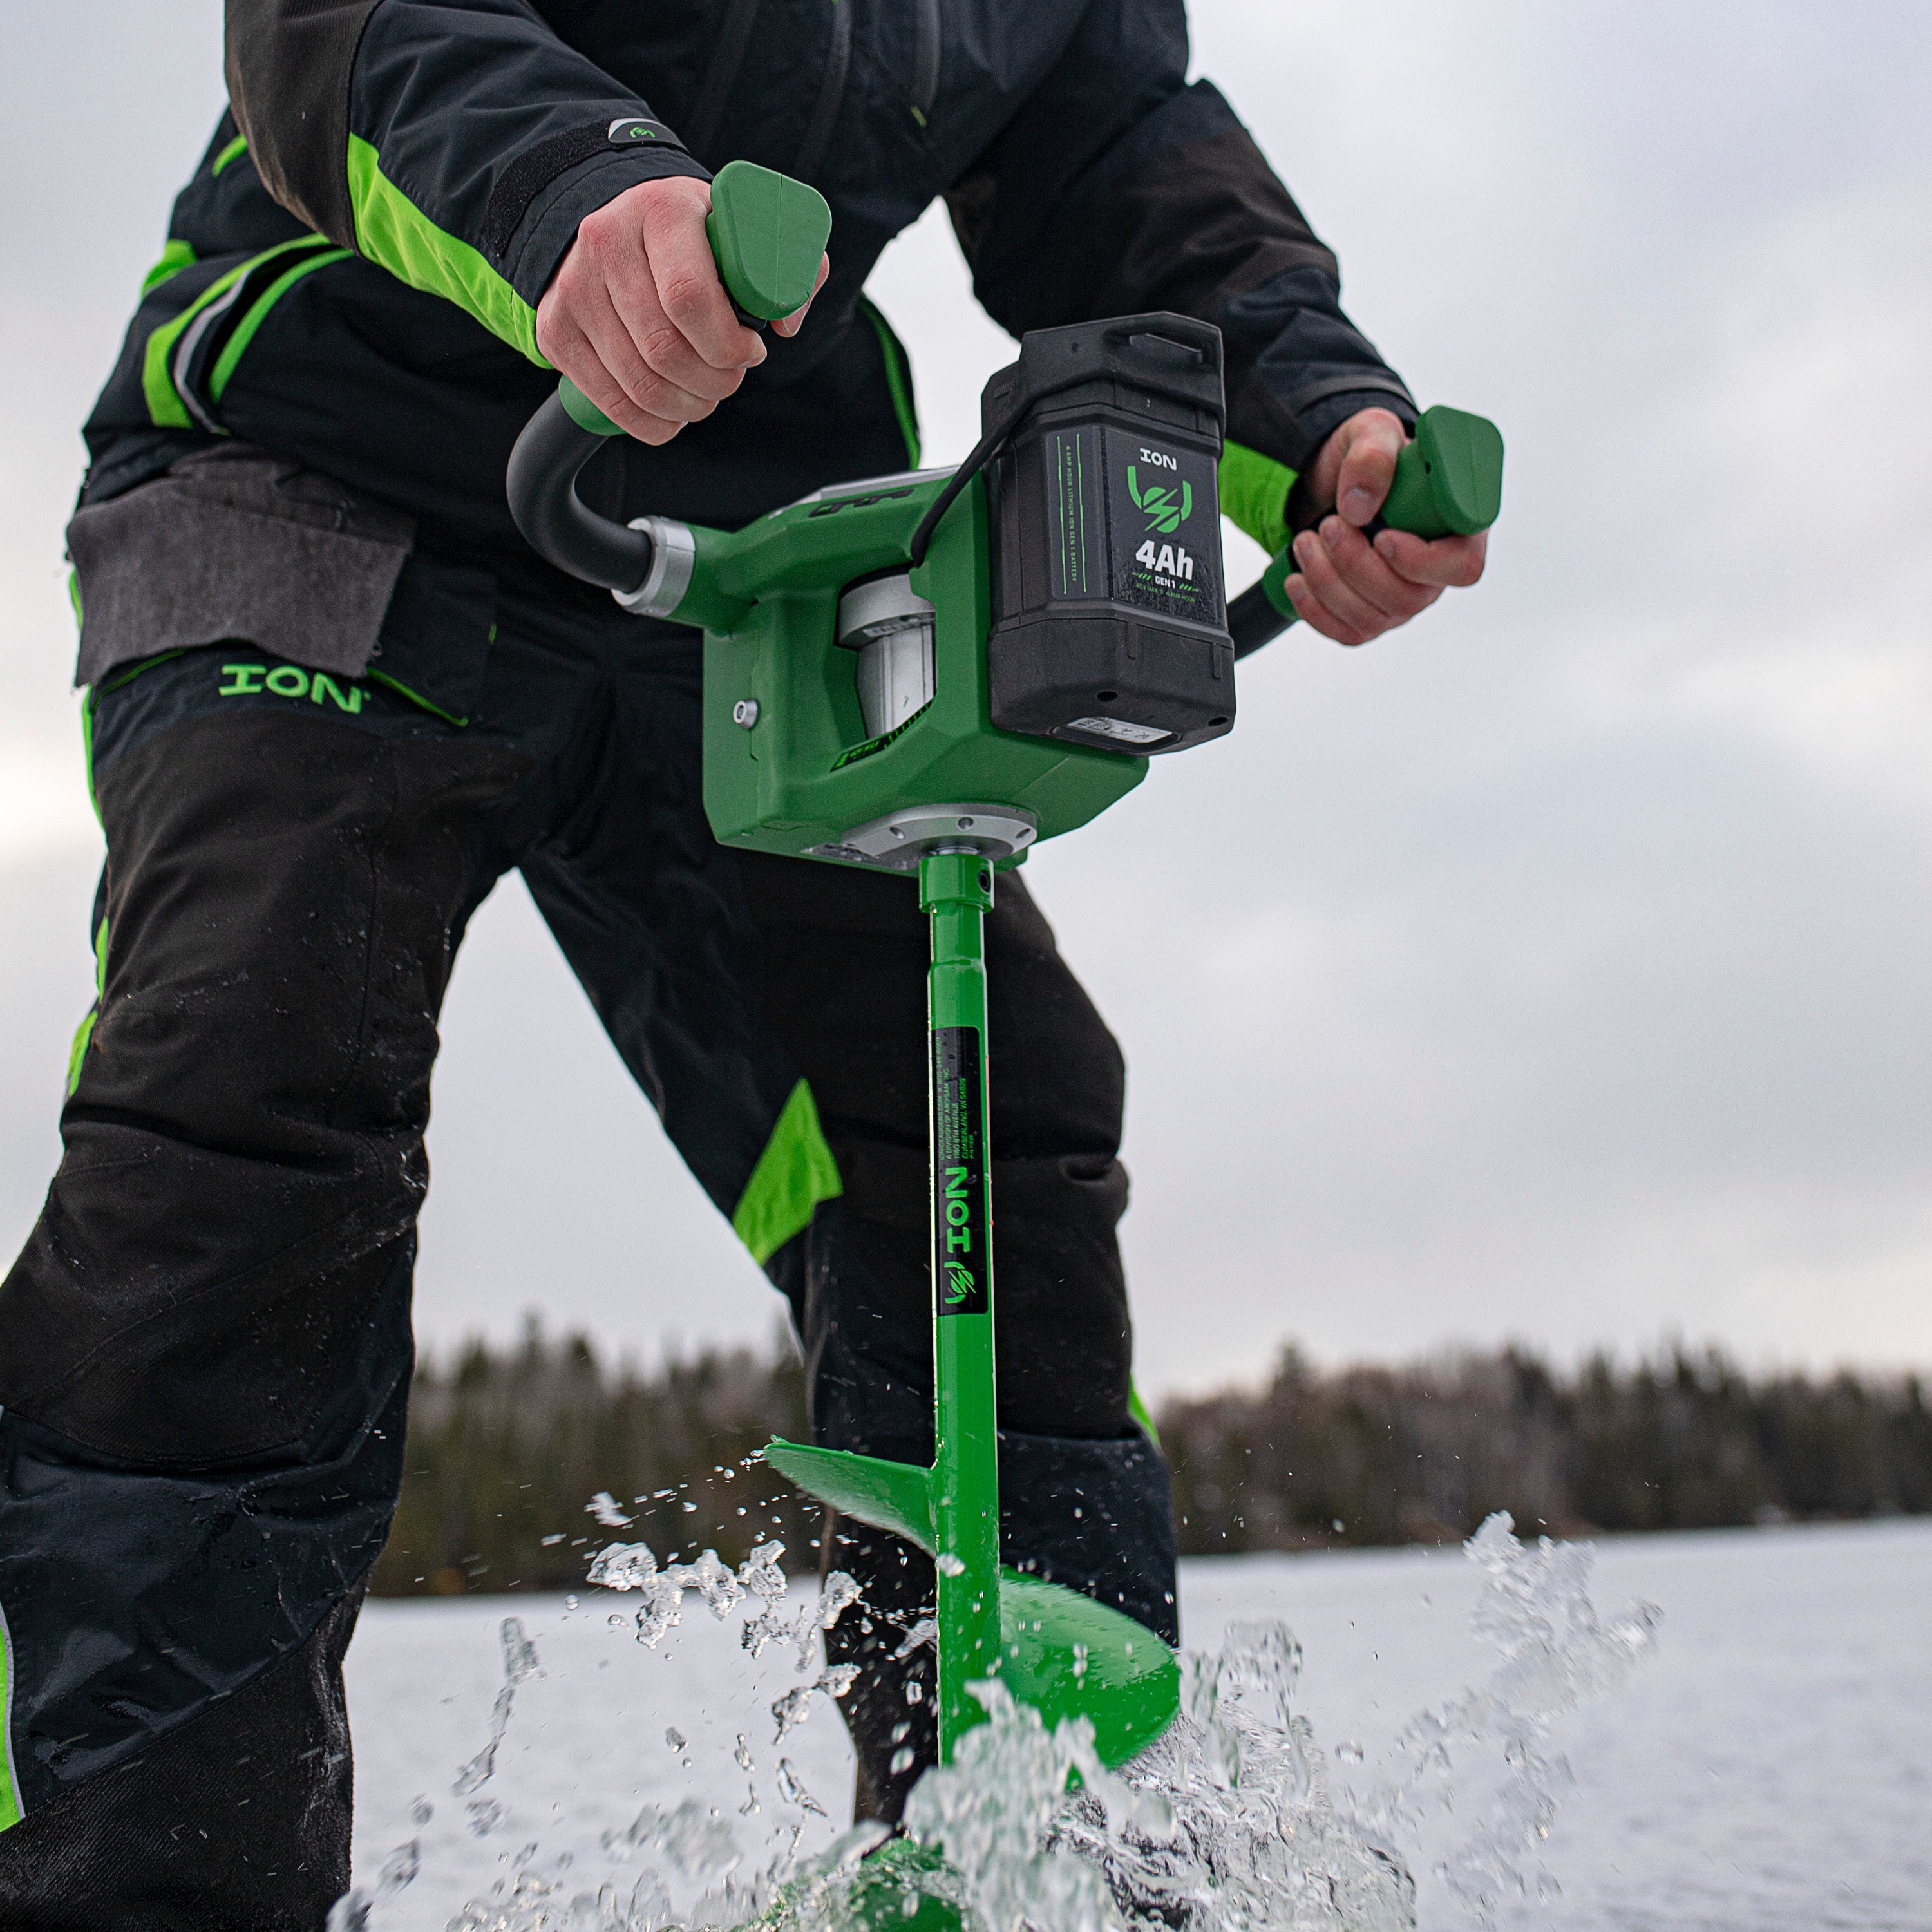 ION 49350 G2 8 Electric Power Ice Fishing Auger 4Ah 40V MAX Gen 2  Lithium-Ion